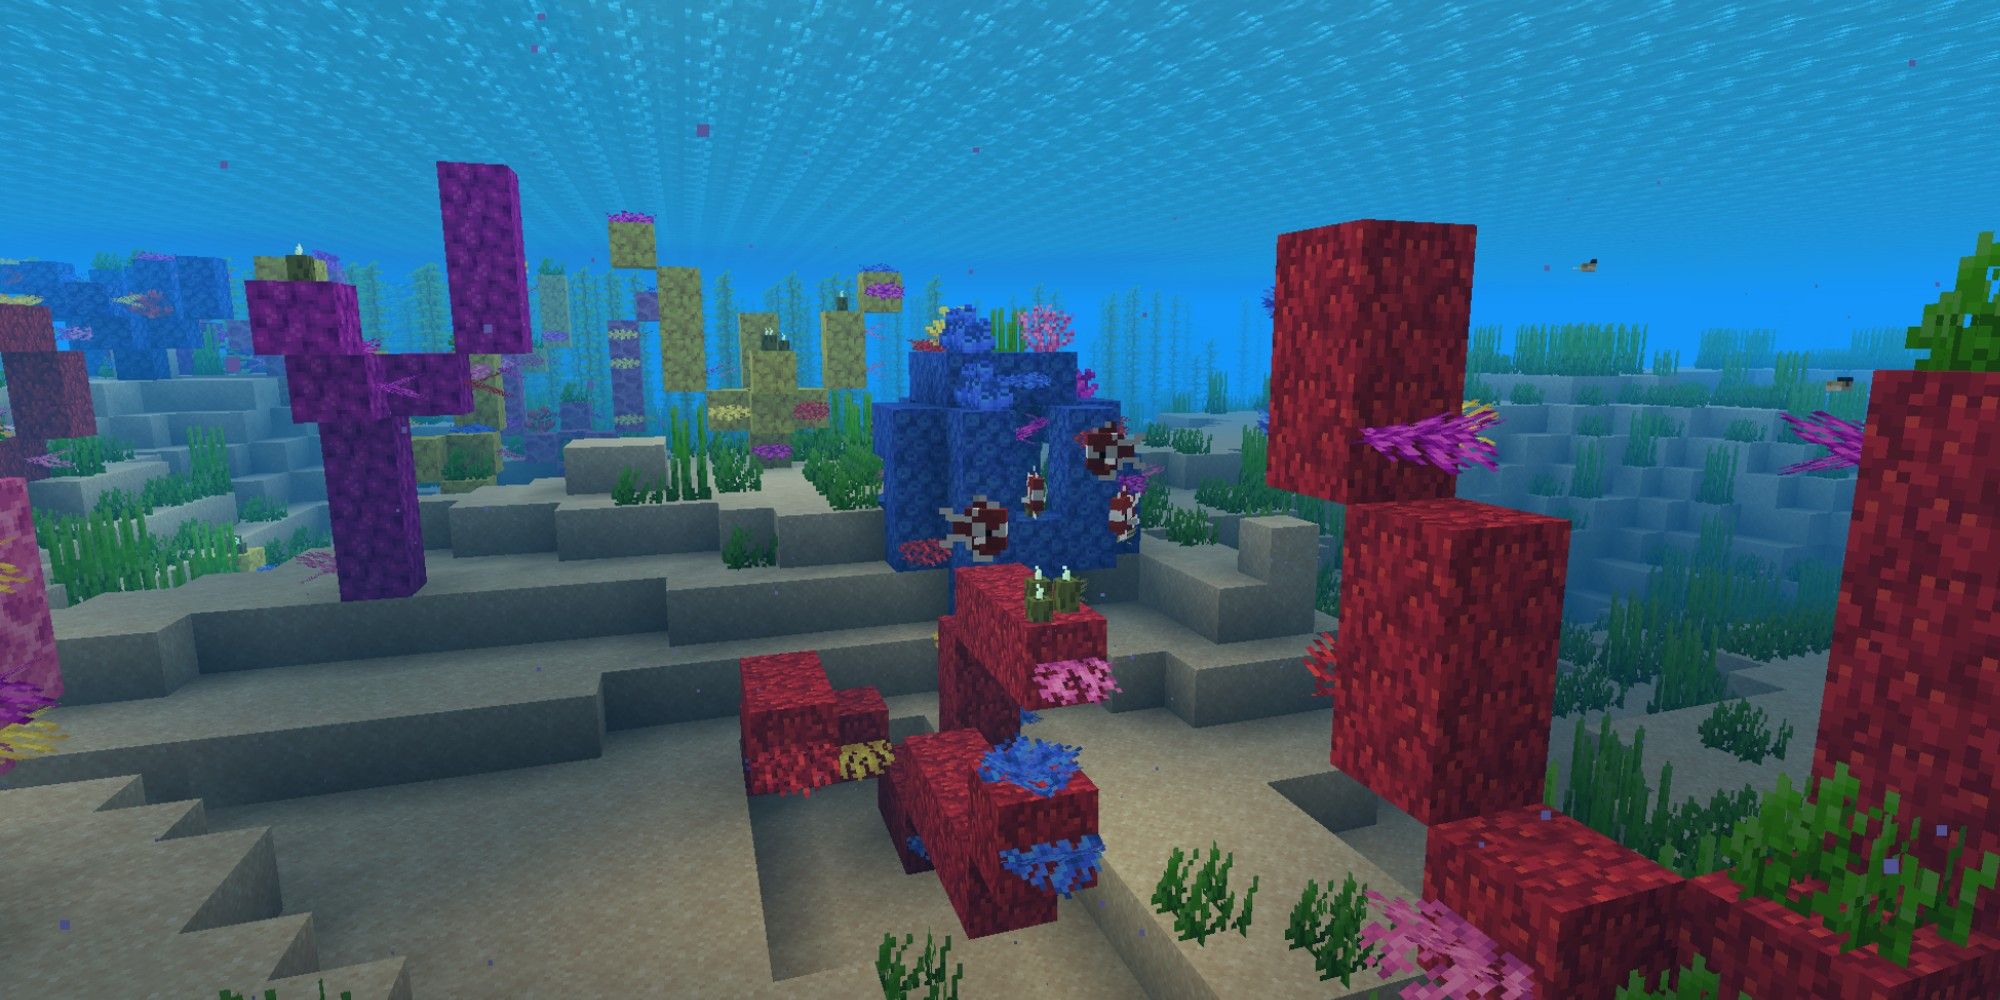 How To Find Coral Reef In Minecraft